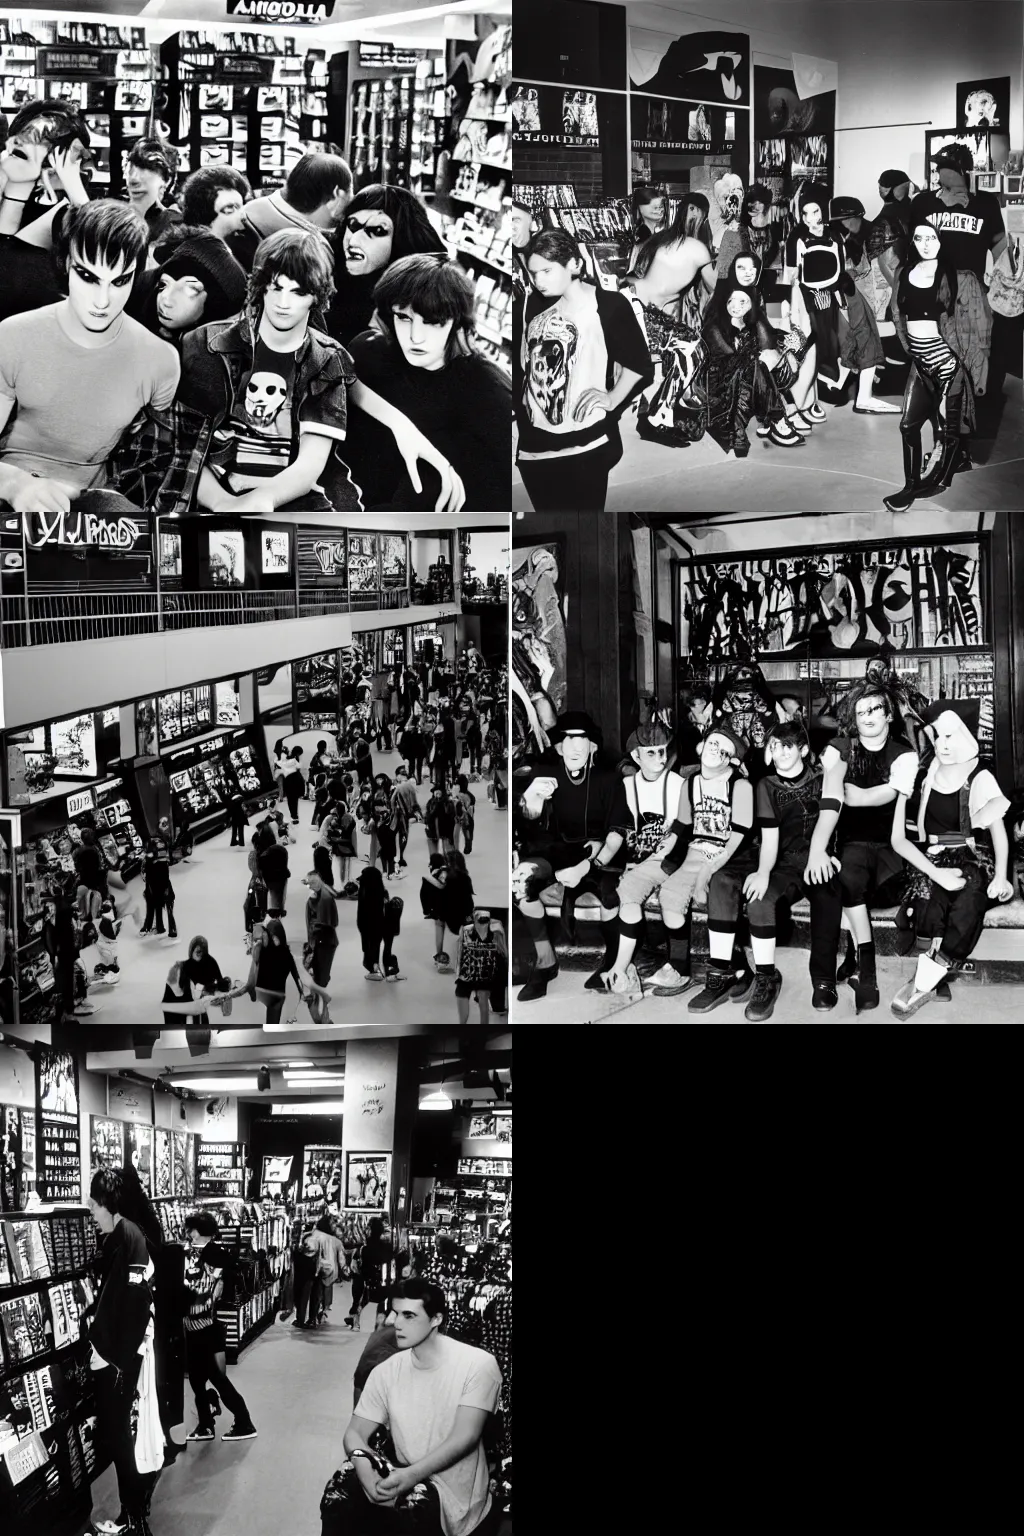 Prompt: an hd photo by ansel adams. a bunch of mallgoths hanging out at a hot topic store in the mall.